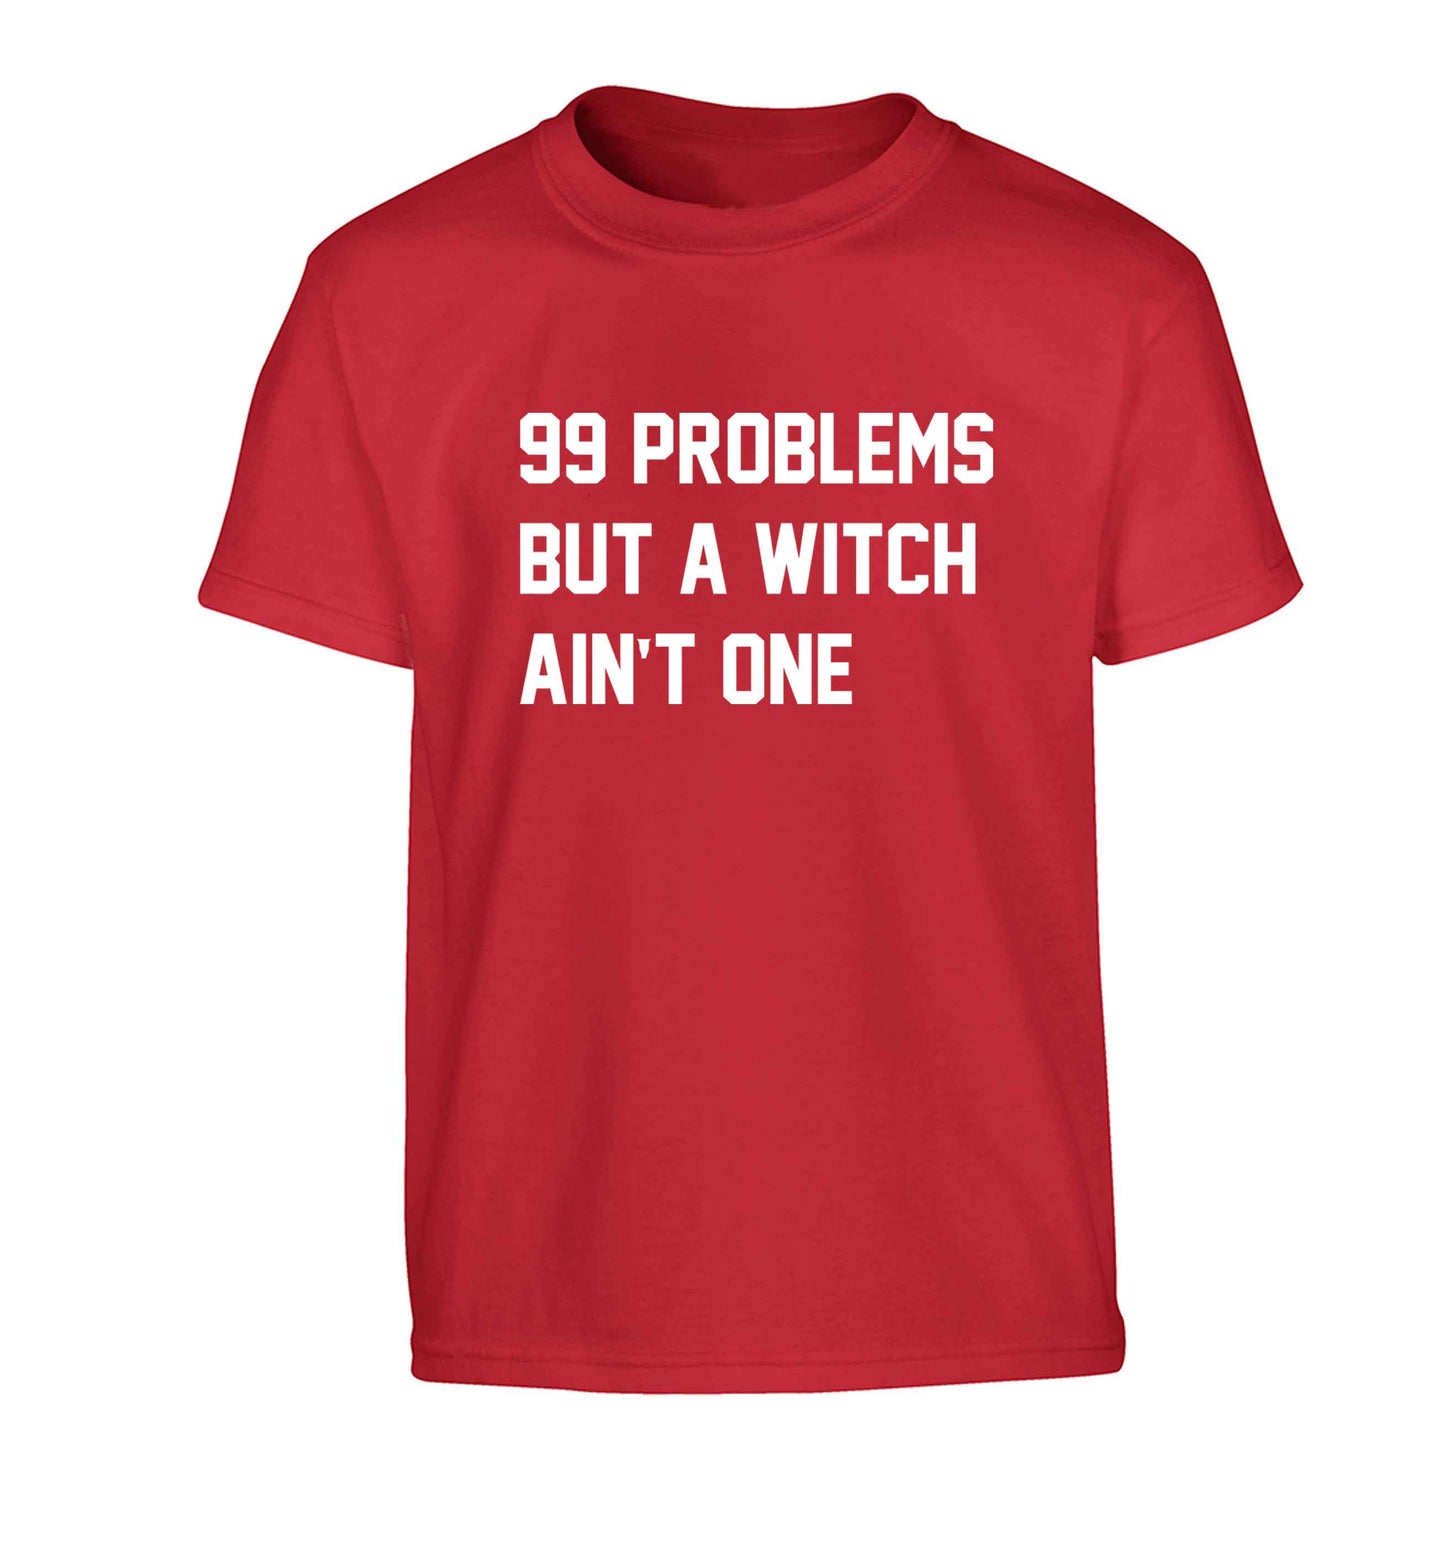 99 Problems but a witch aint one Children's red Tshirt 12-13 Years